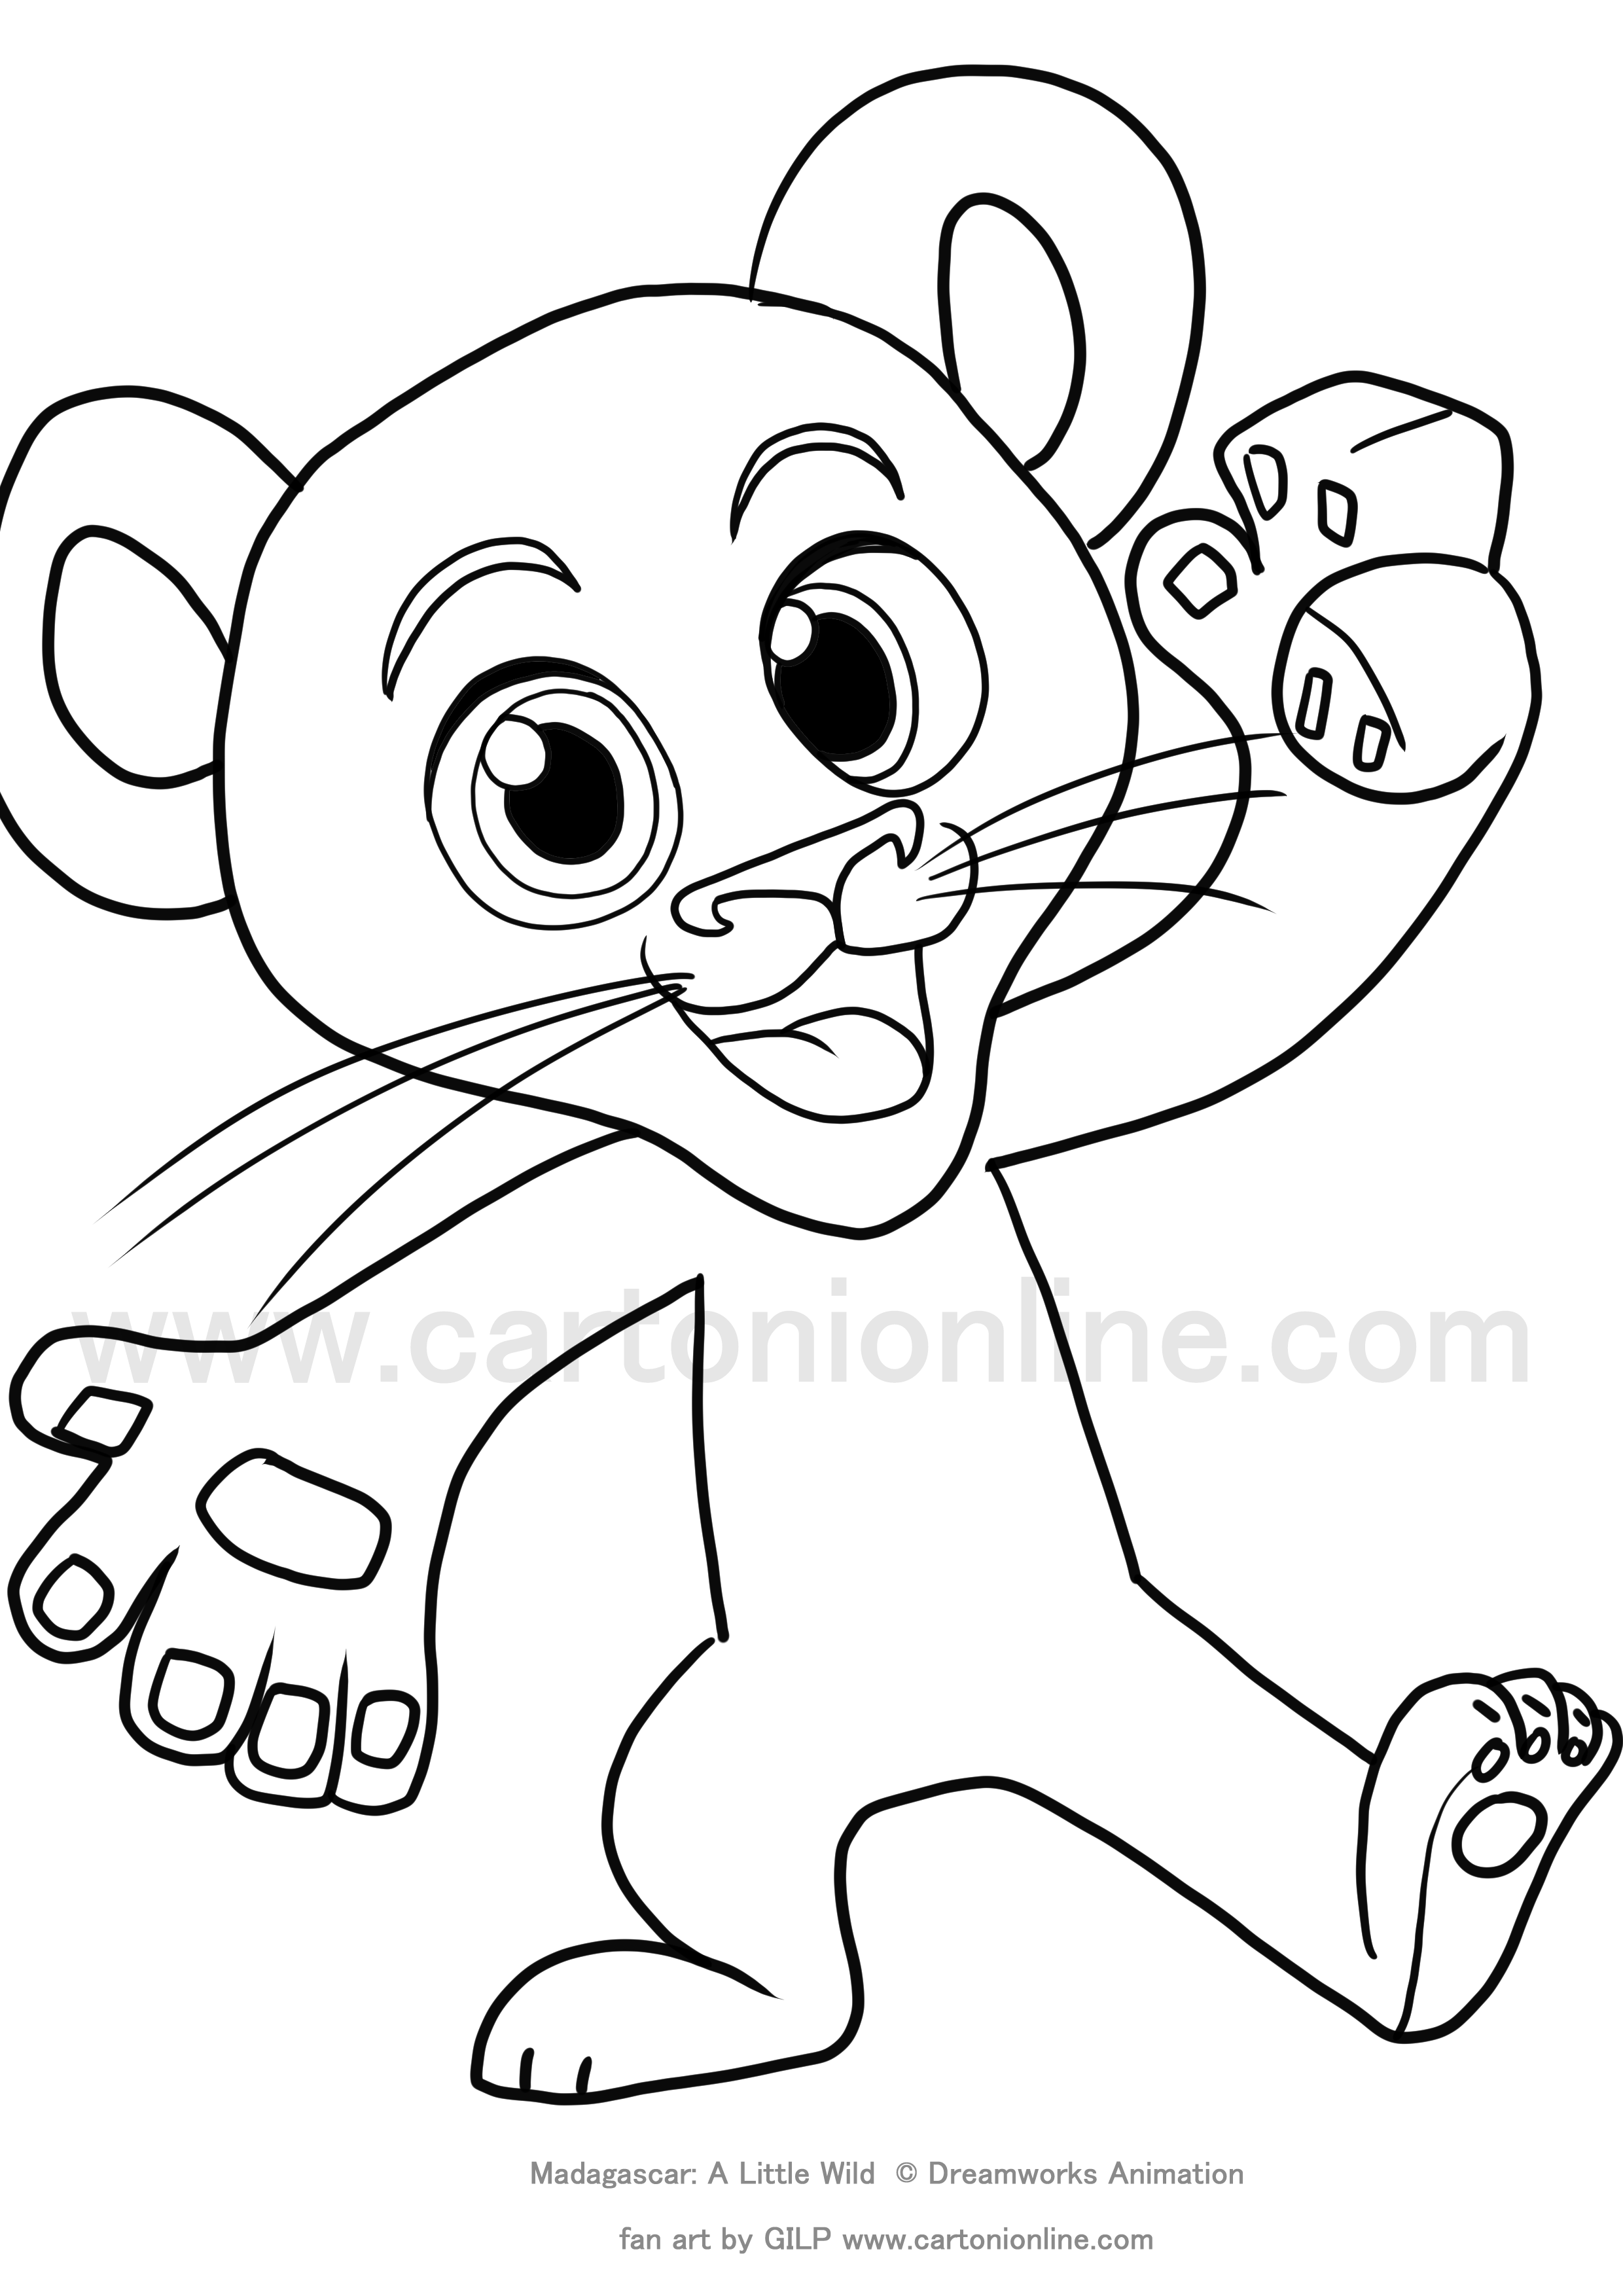 Alex from Madagascar: A Little Wild coloring page to print and coloring